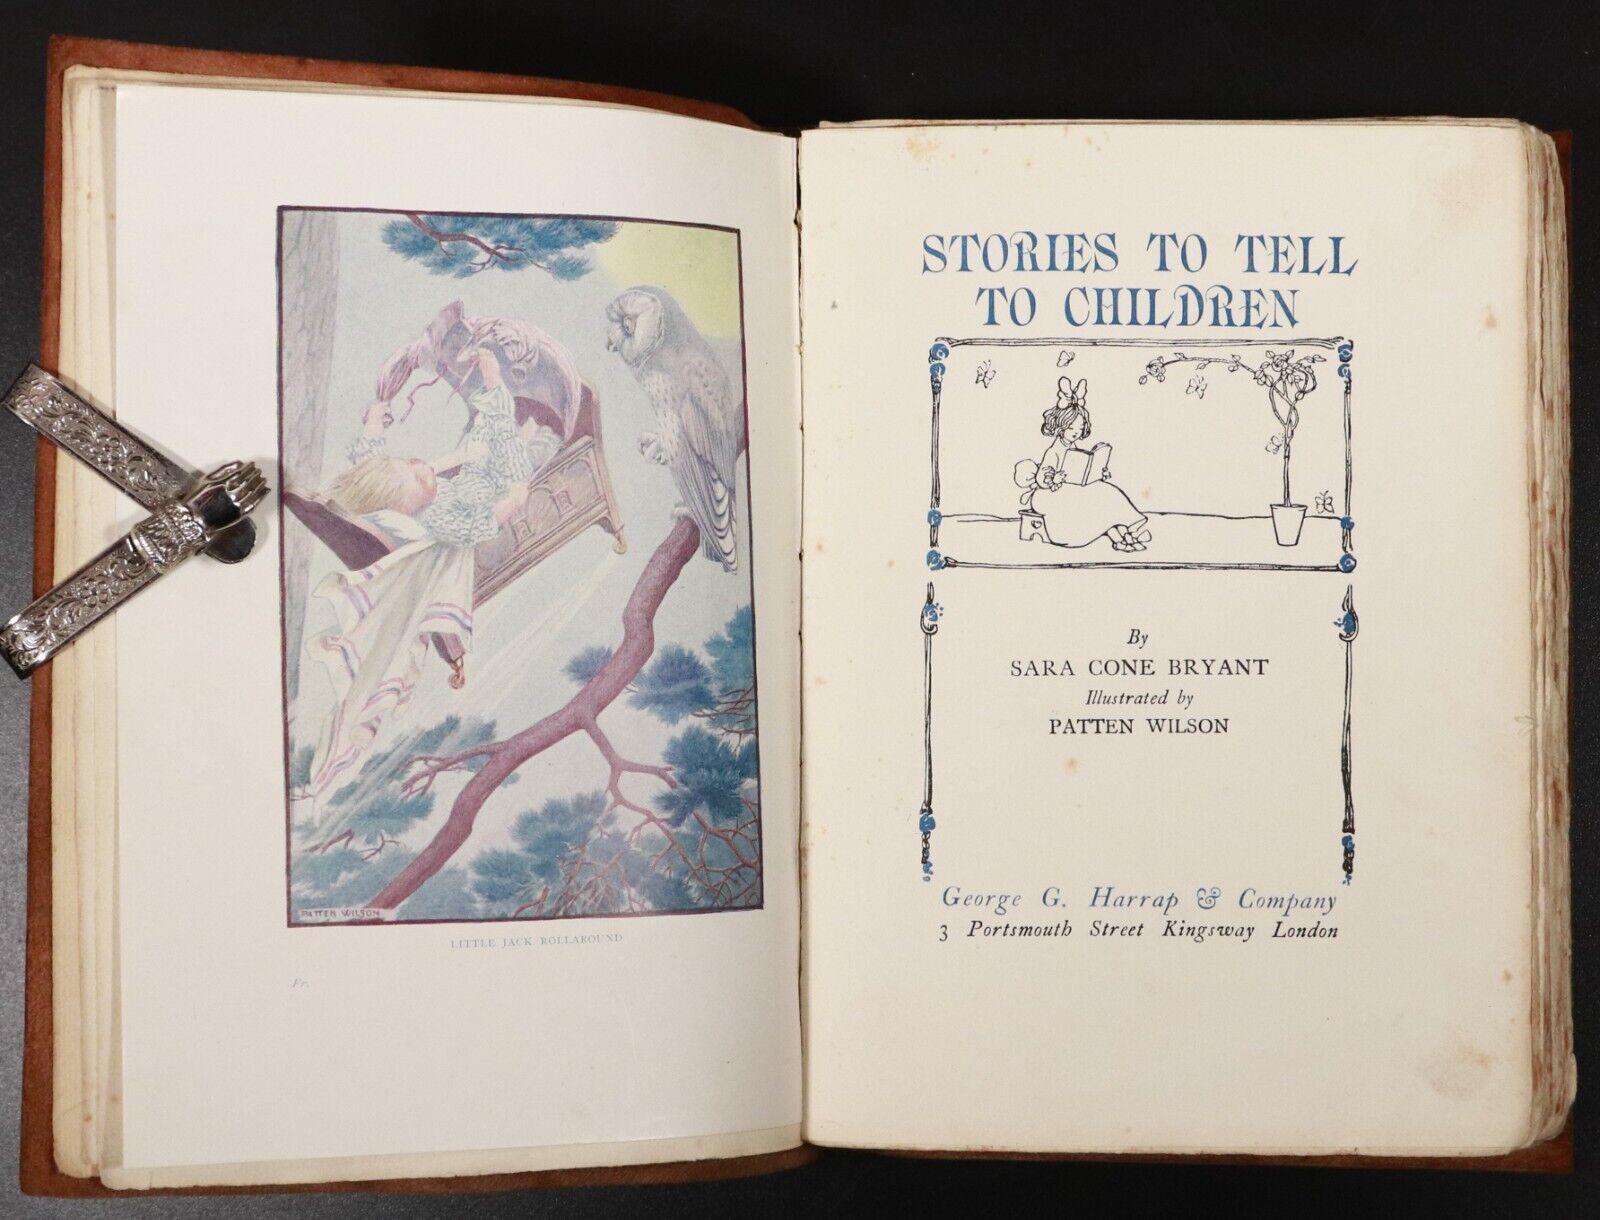 c1925 Stories To Tell Children by Sarah Cone Bryant Antique Childrens Book - 0